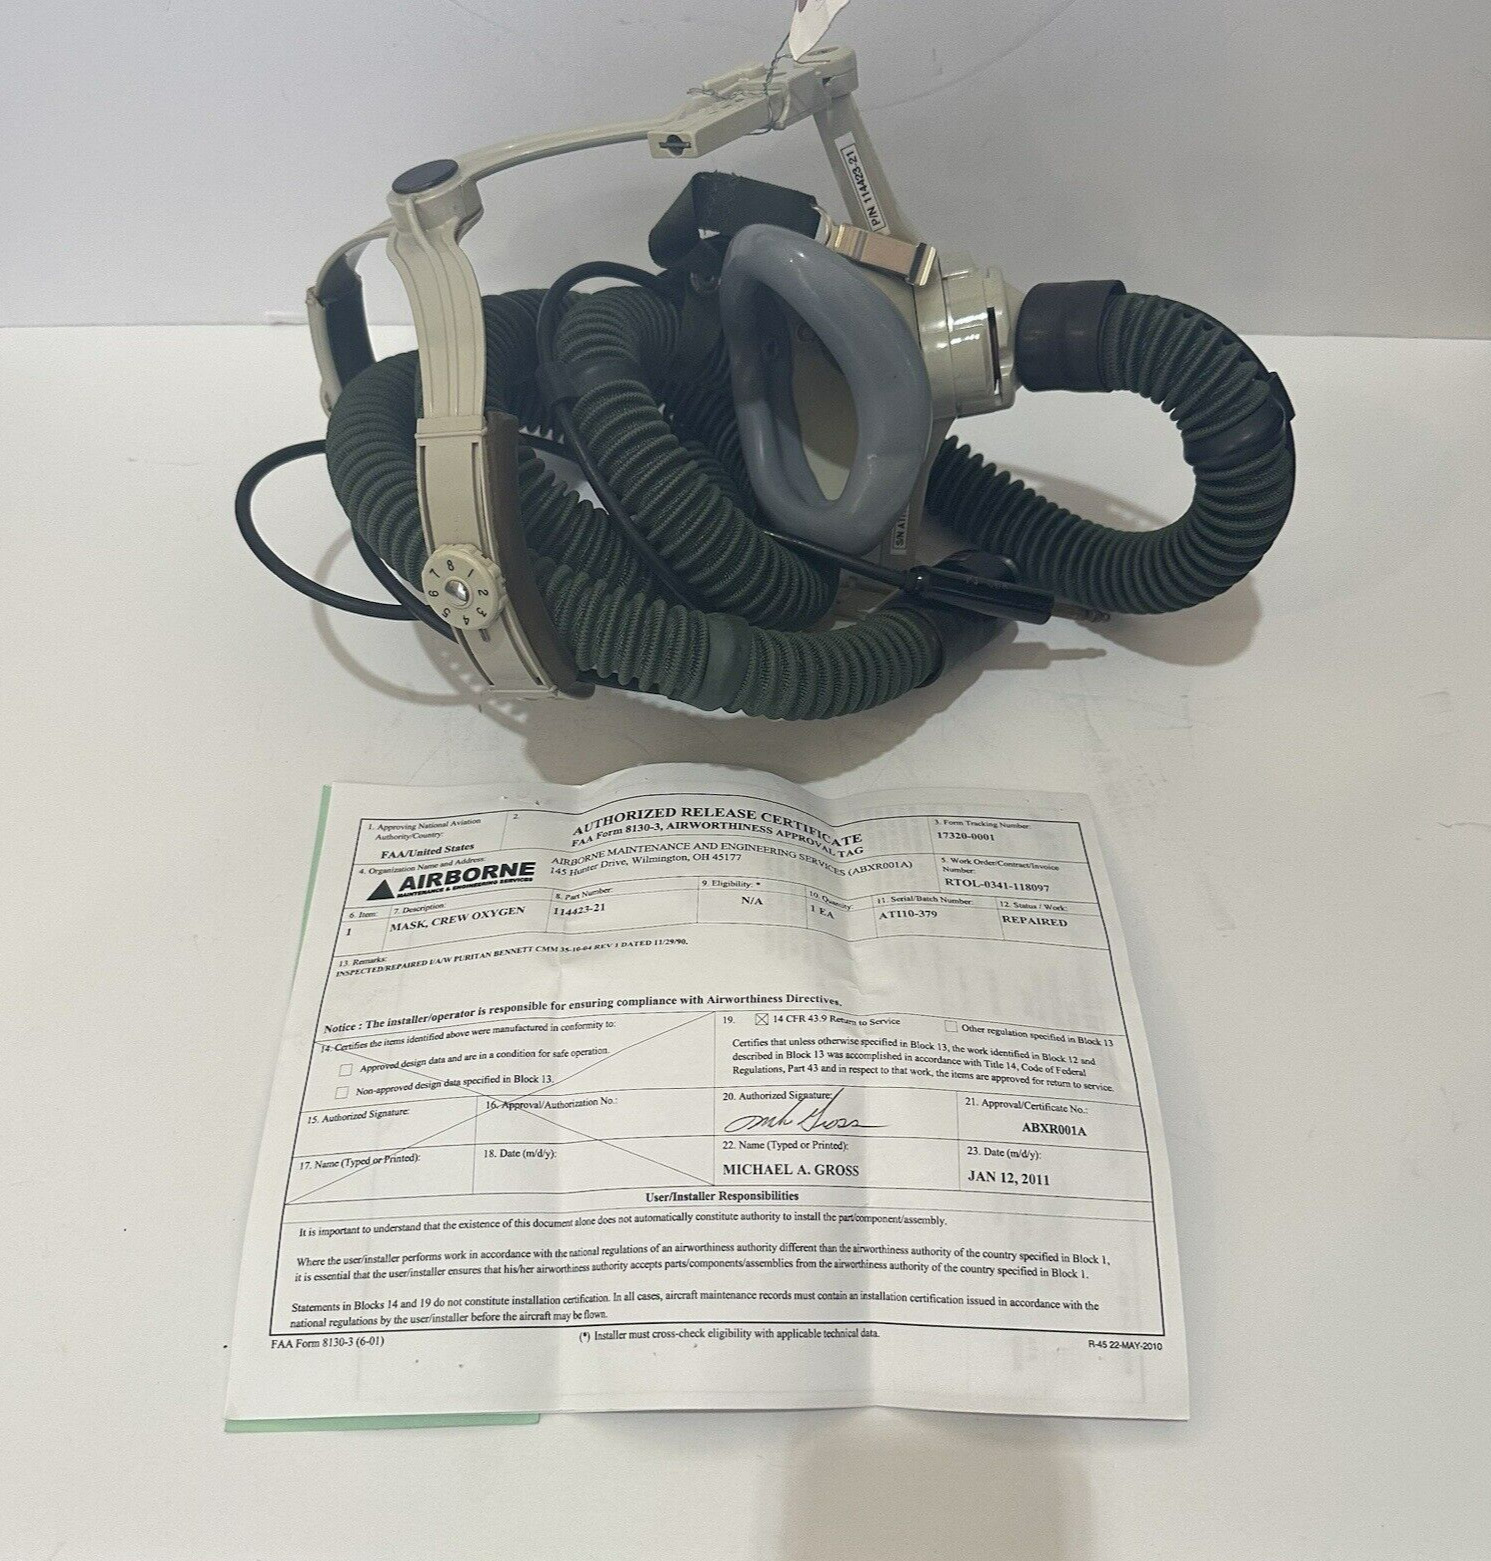 PURITAN BENNETT CREW OXYGEN MASK P/N 114423-21 REPAIRED WITH FAA 8130-3 FROM